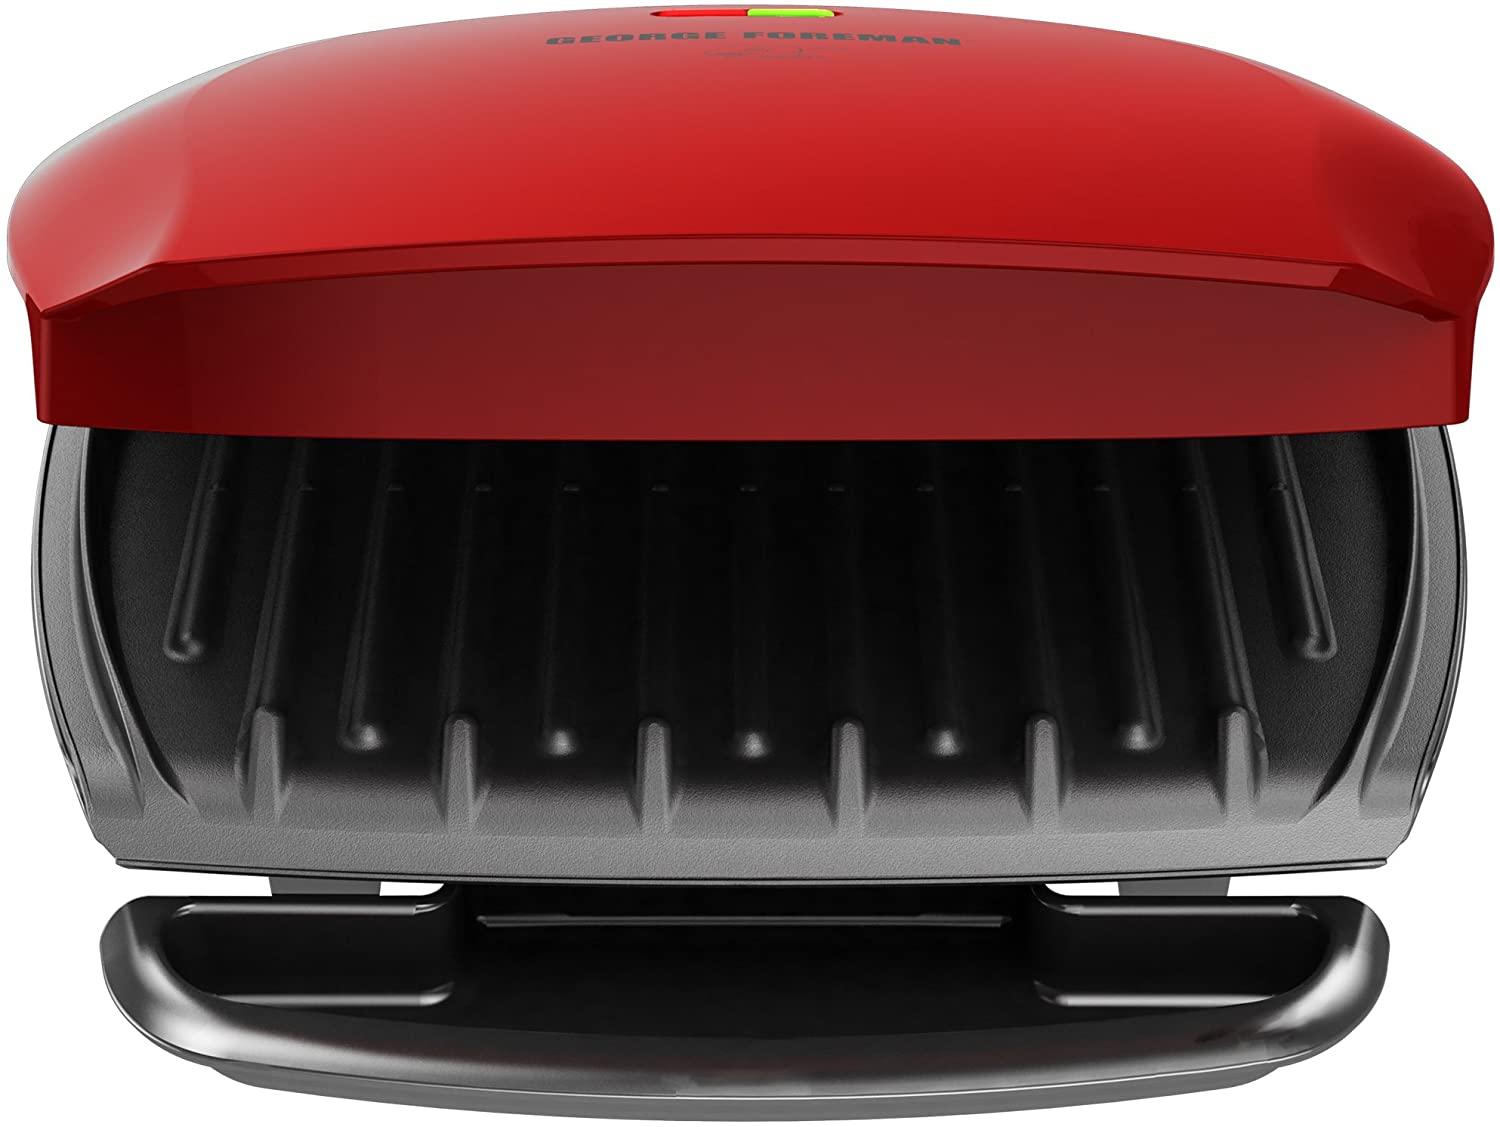 George Foreman GR2080RC 2-in-1 Grill & Panini - Open Box